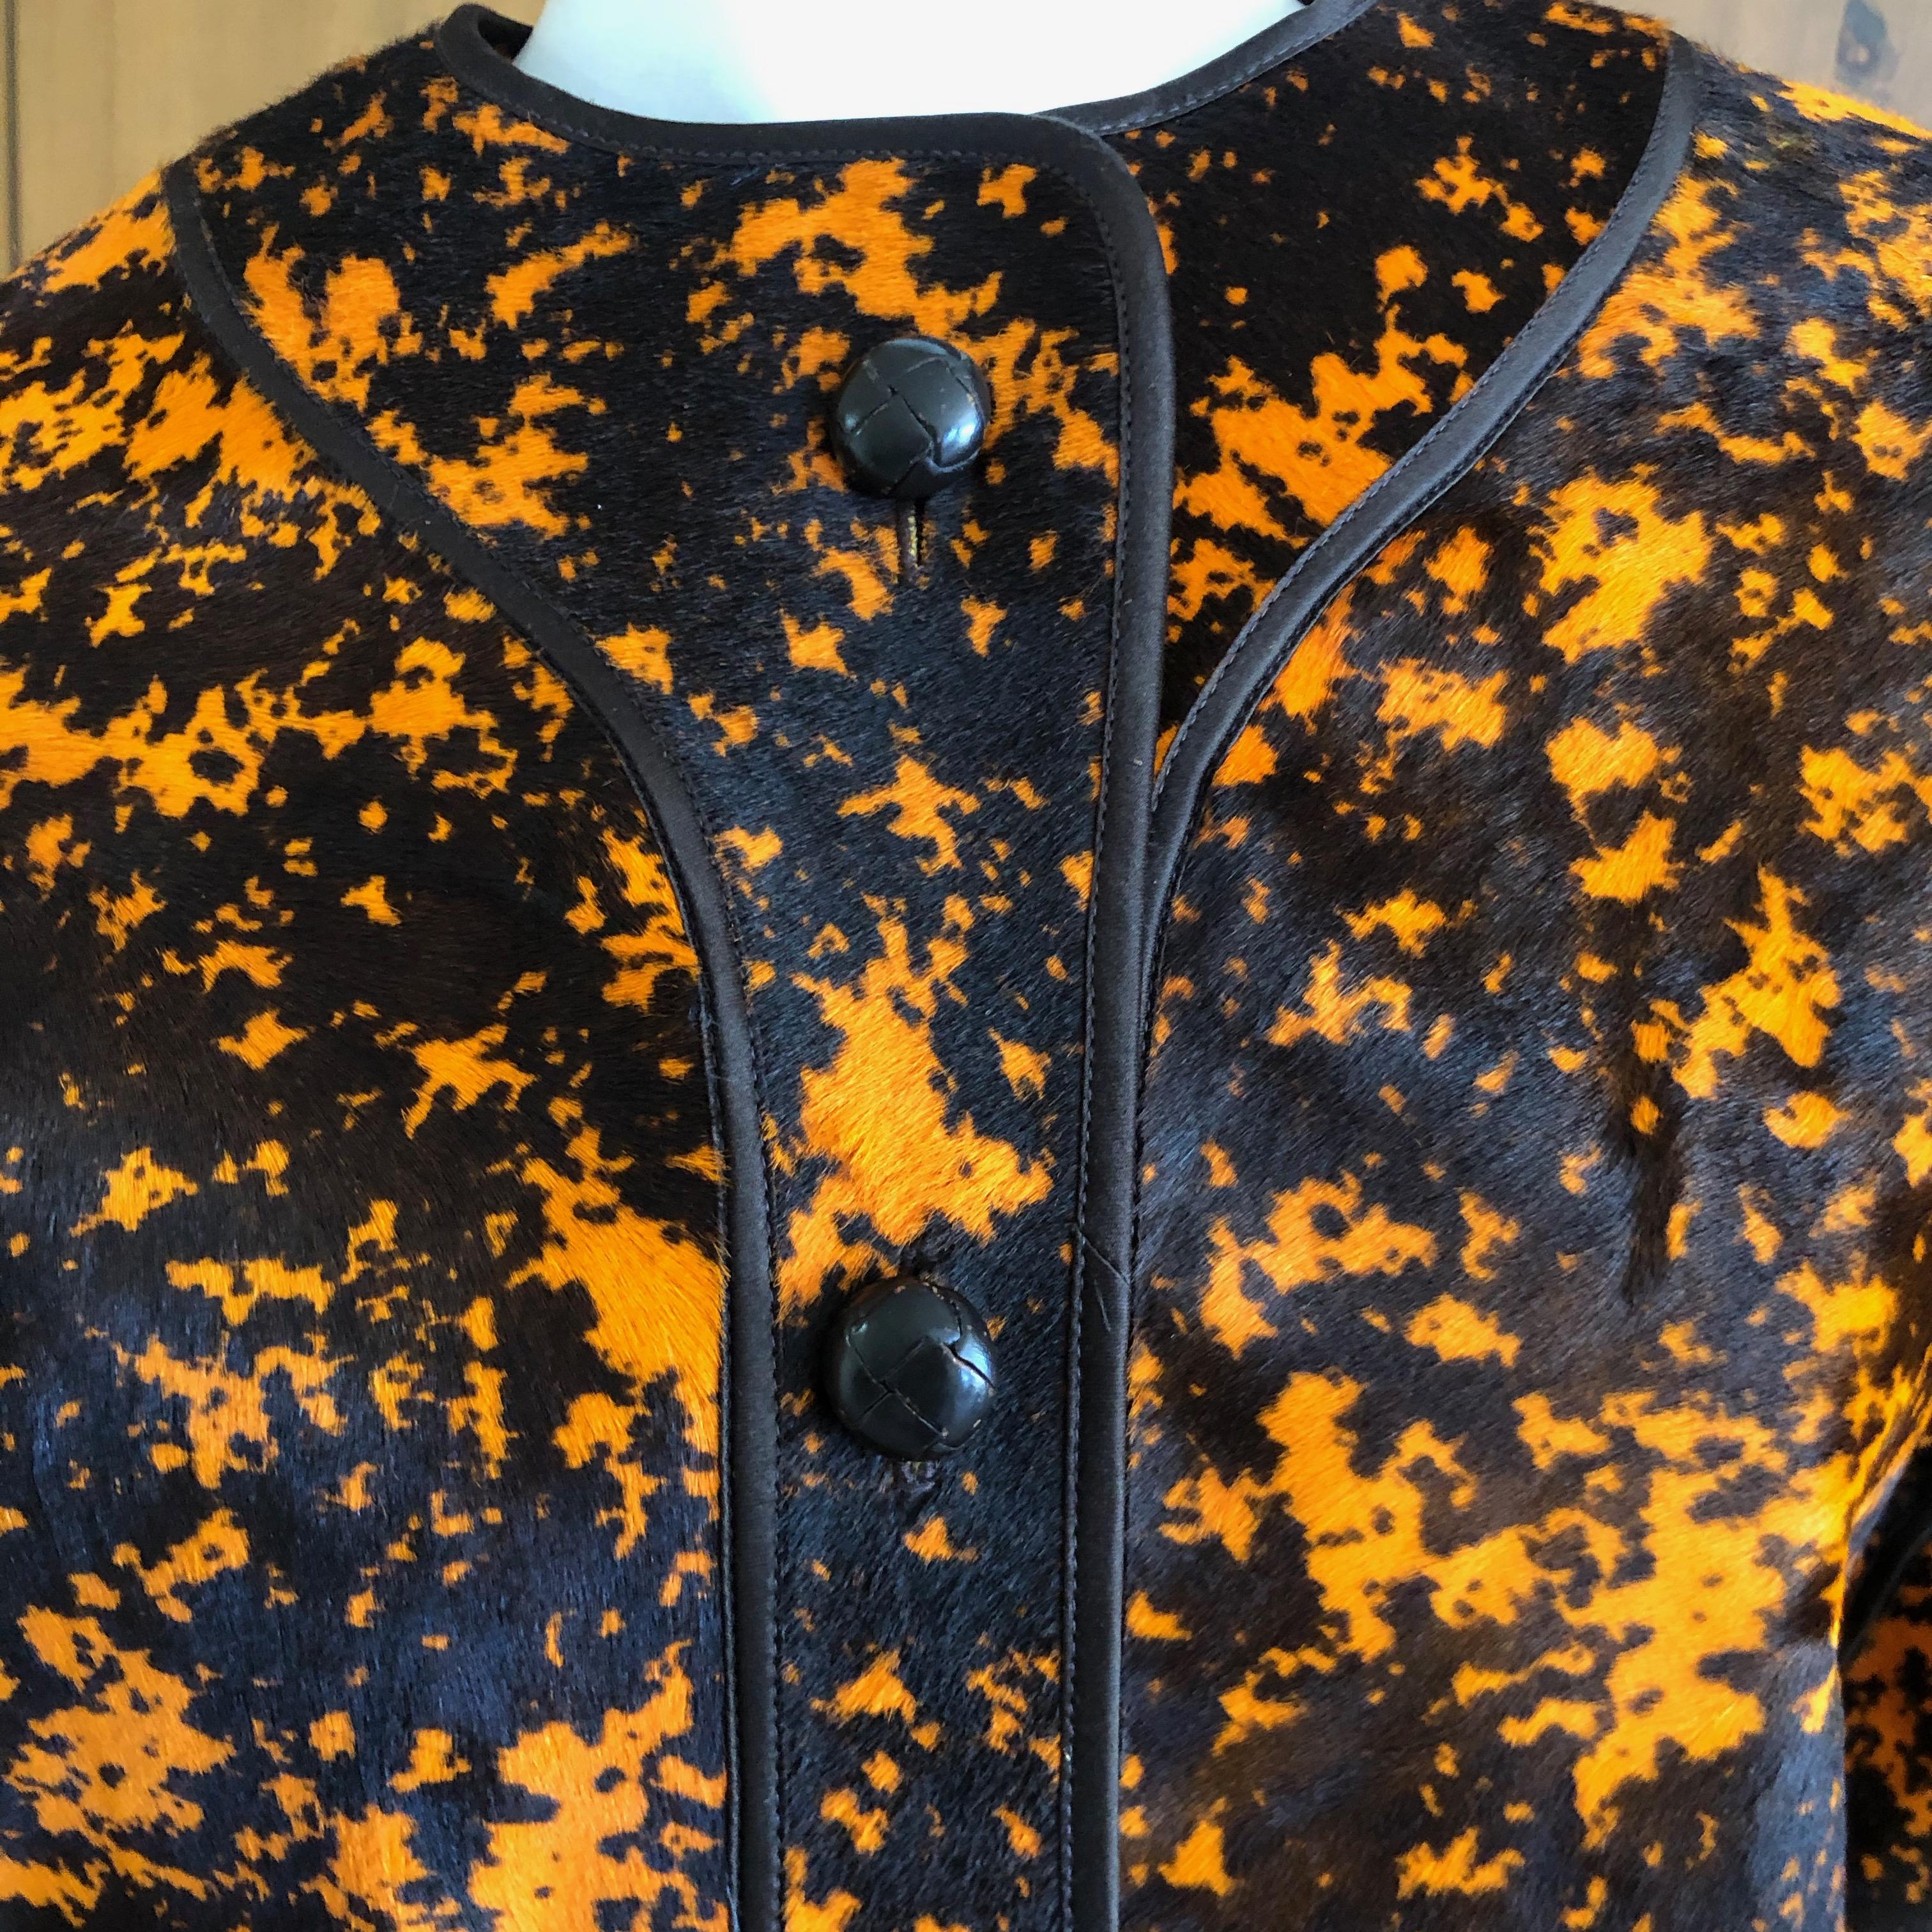 Geoffrey Beene Vintage Orange Splatter Print Ponyhair Jacket.
Classic Beene styling, this is stunning.
It is calf hair with quilted lining, so be advised it is quite heavy , and a little stiff due to the nature of the hides.
Bust 40